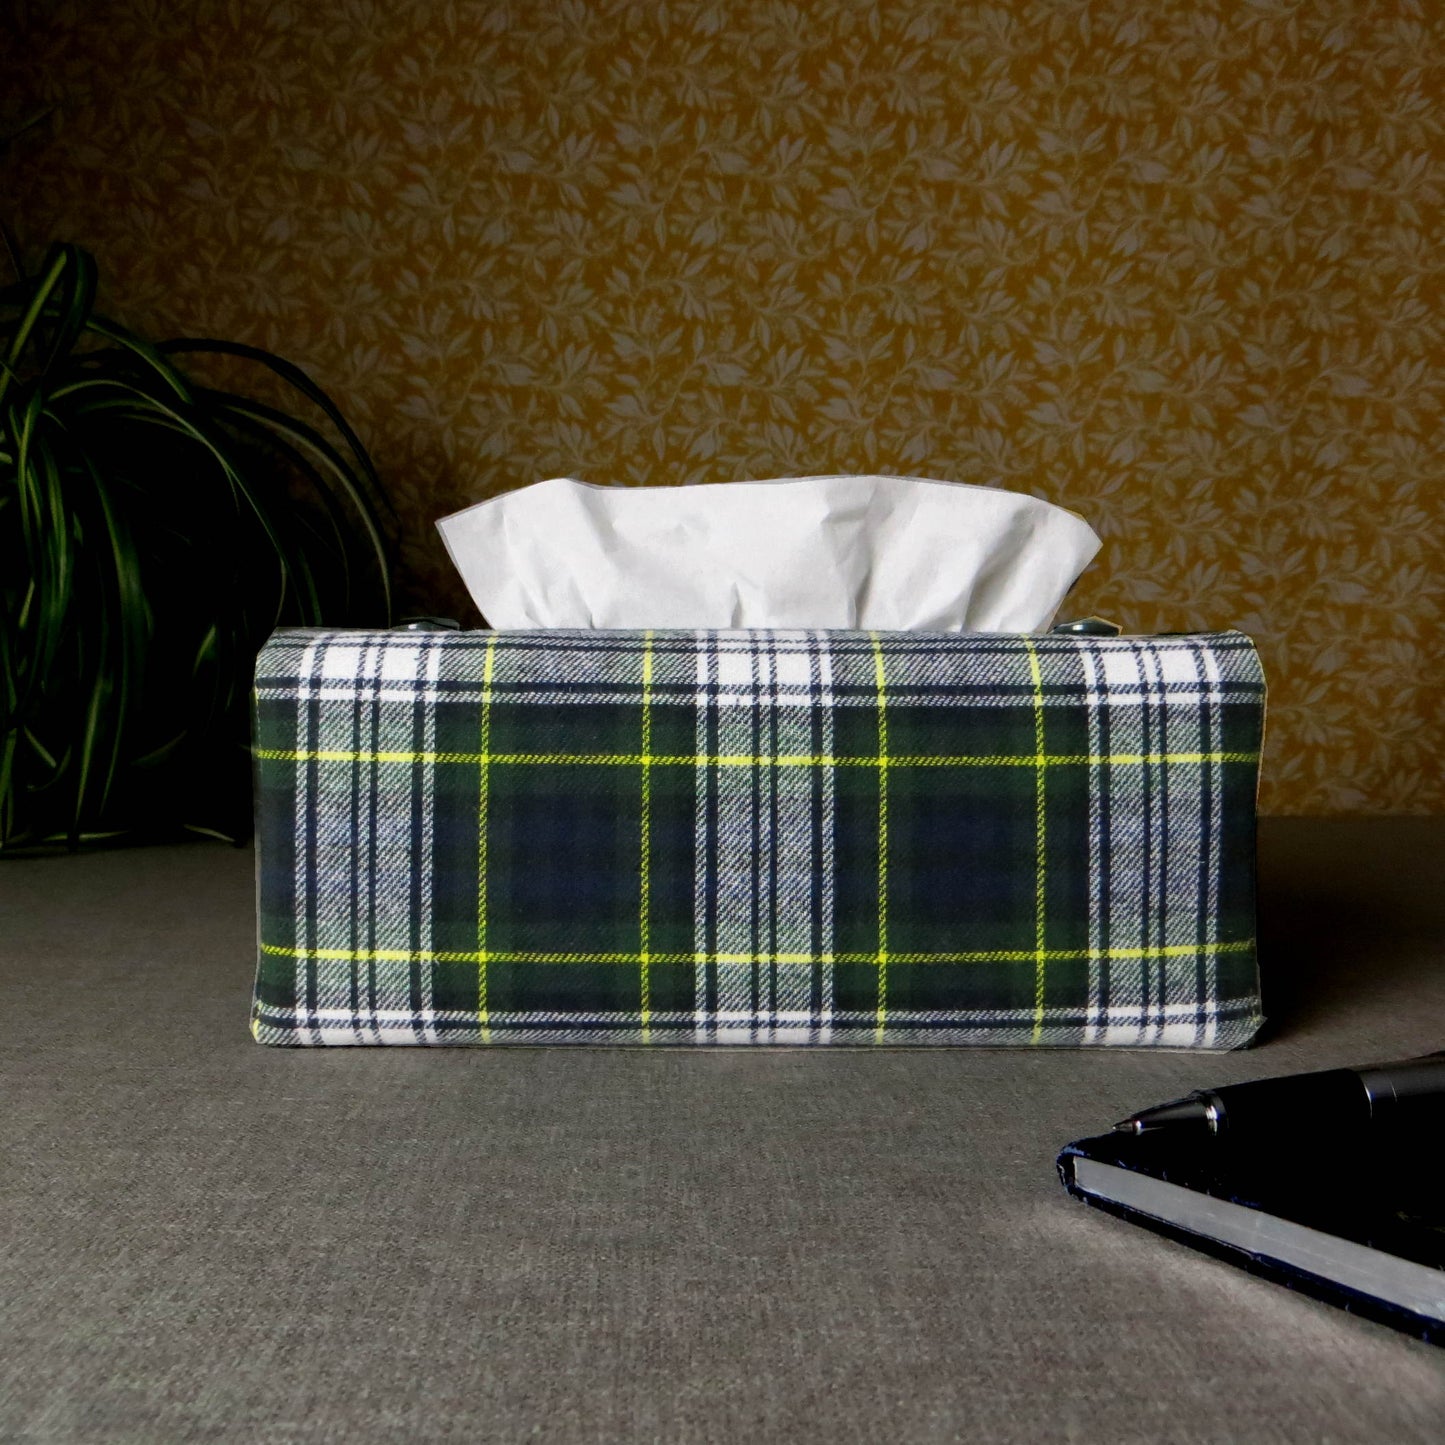 Woven brushed cotton rectangle tissue box cover with blue, green, and white tartan pattern with a yellow stripe